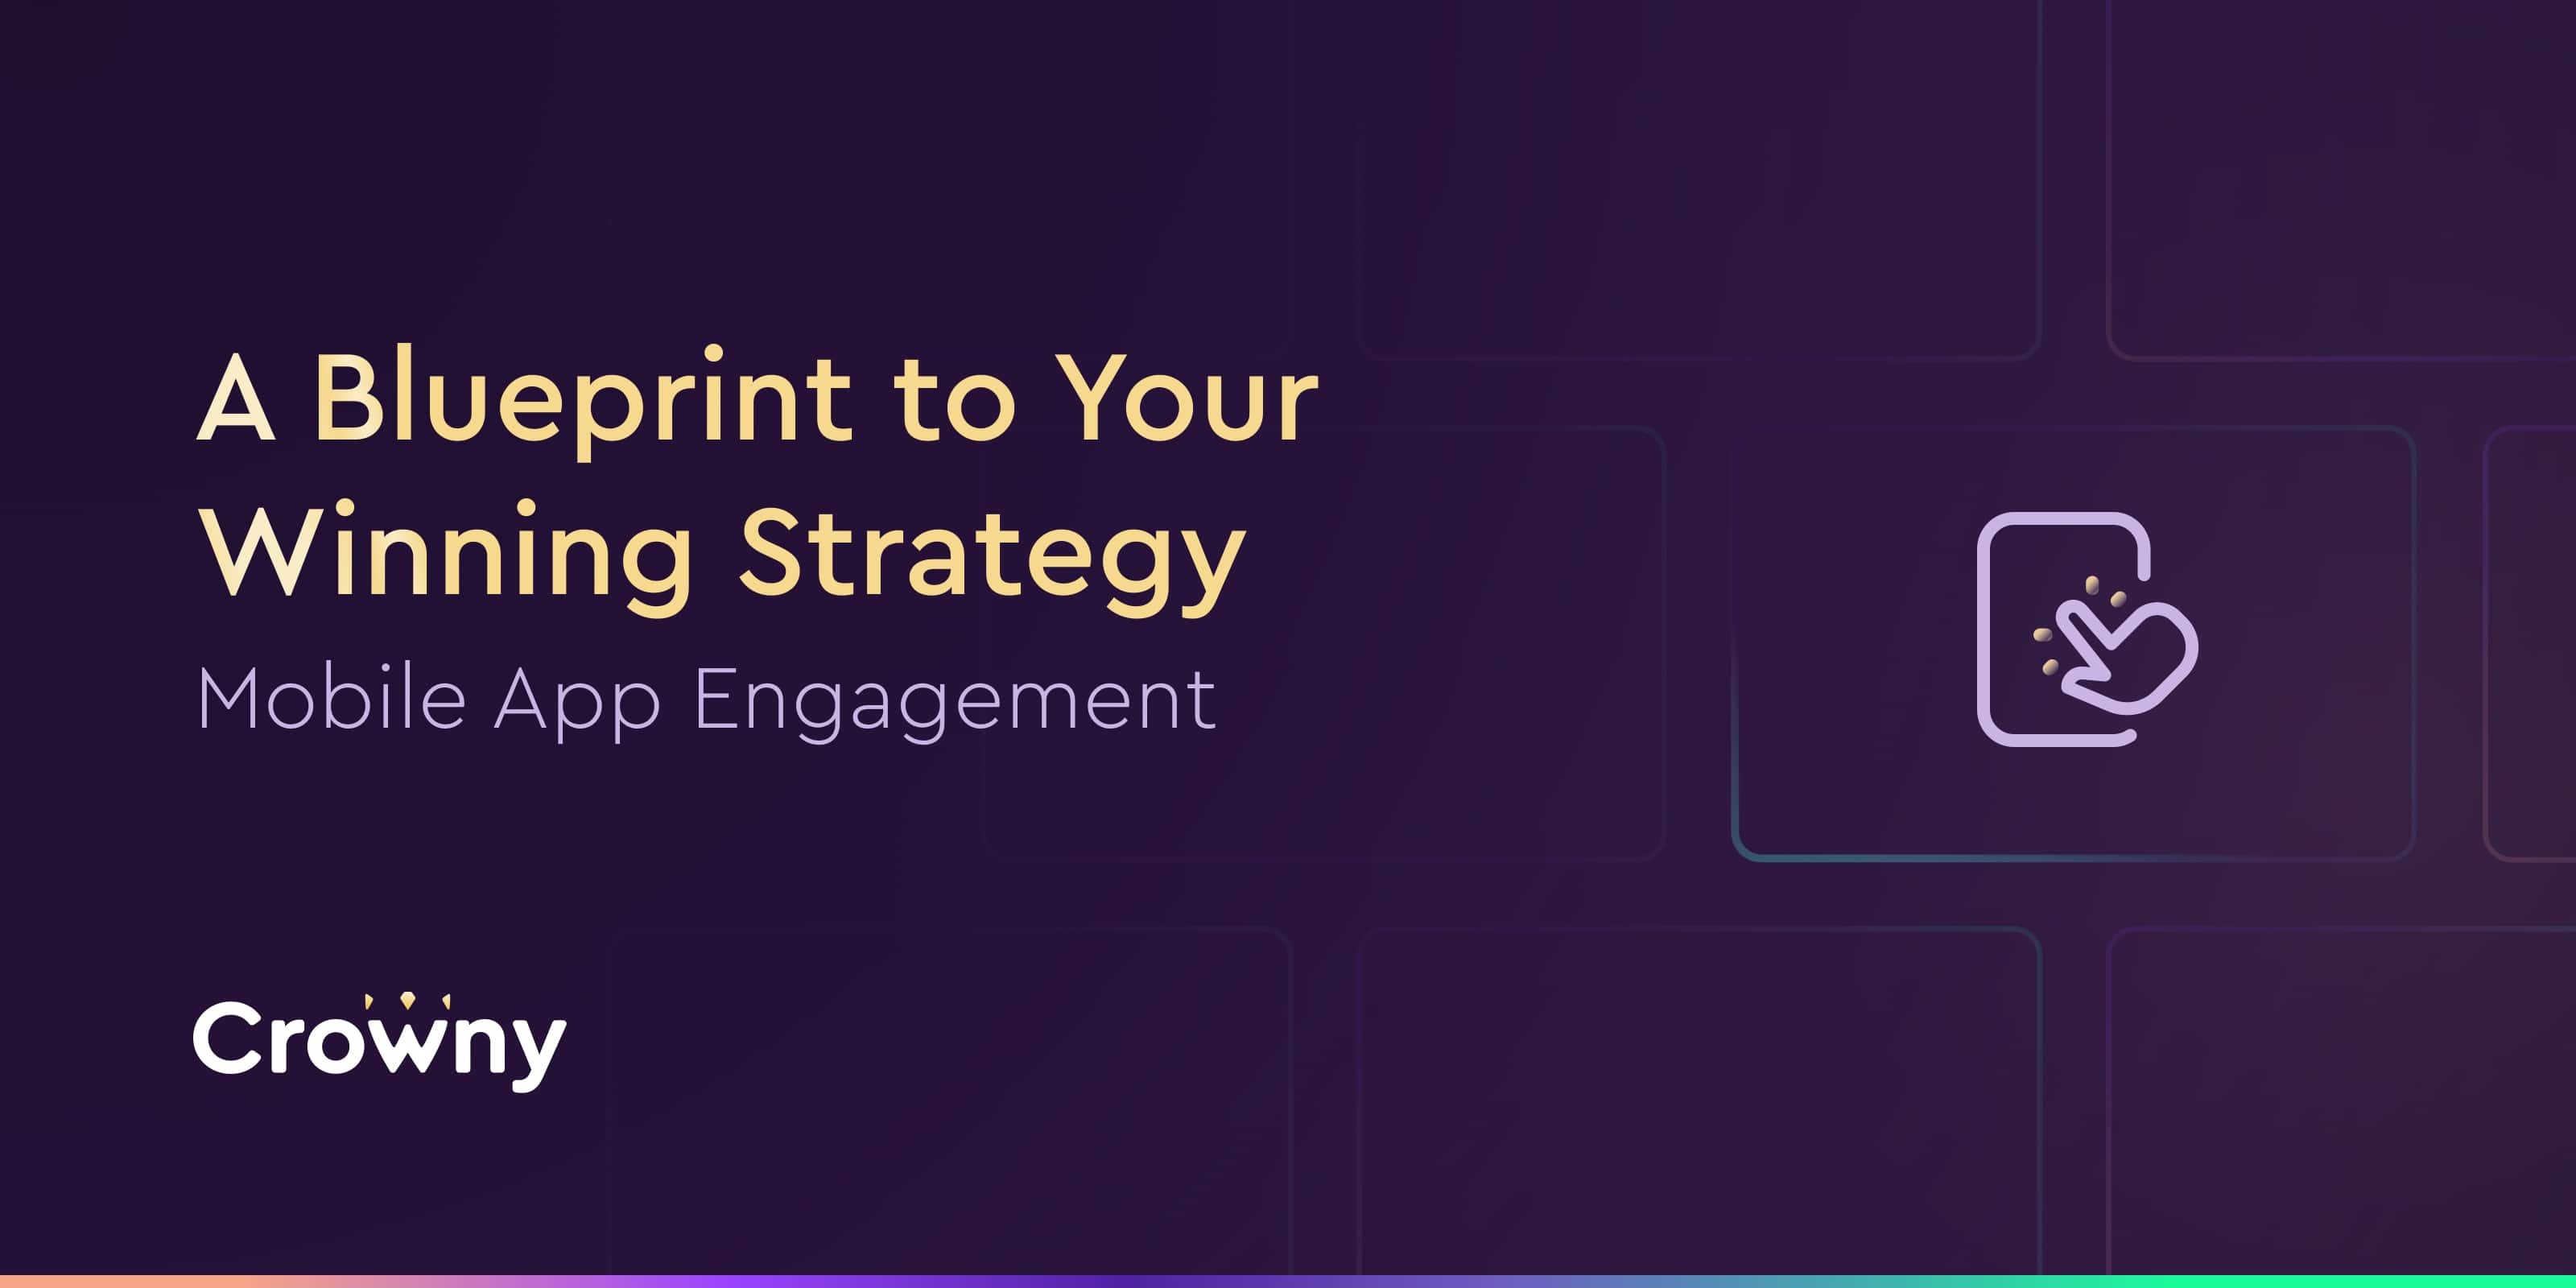 Mobile App Engagement: A blueprint to your winning strategy